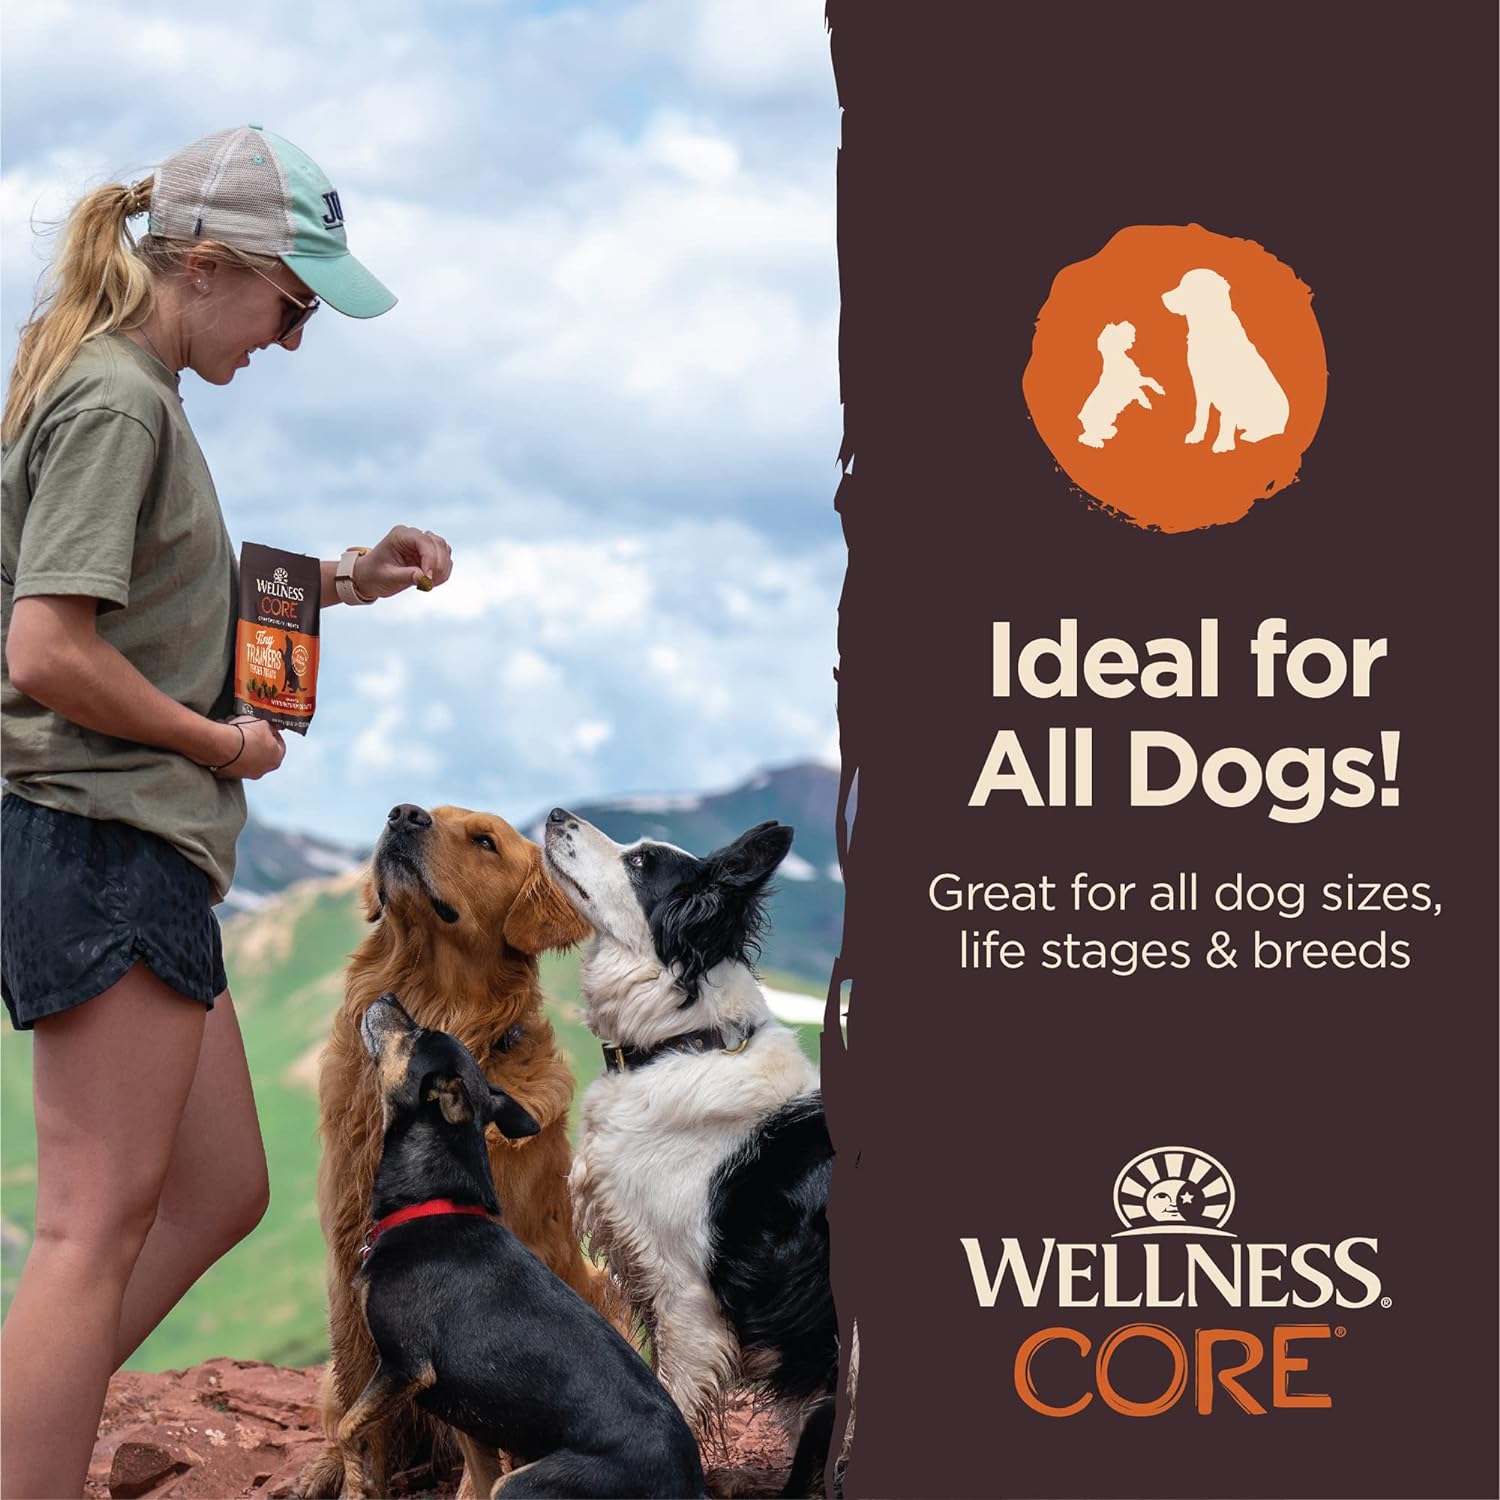 Wellness CORE Soft Tiny Trainers (Previously Petite Treats), Natural Grain-Free Dog Treats for Training, Made with Real Meat, No Artificial Flavors (Turkey & Pomegranate, 6 Ounce Bag) : Pet Supplies